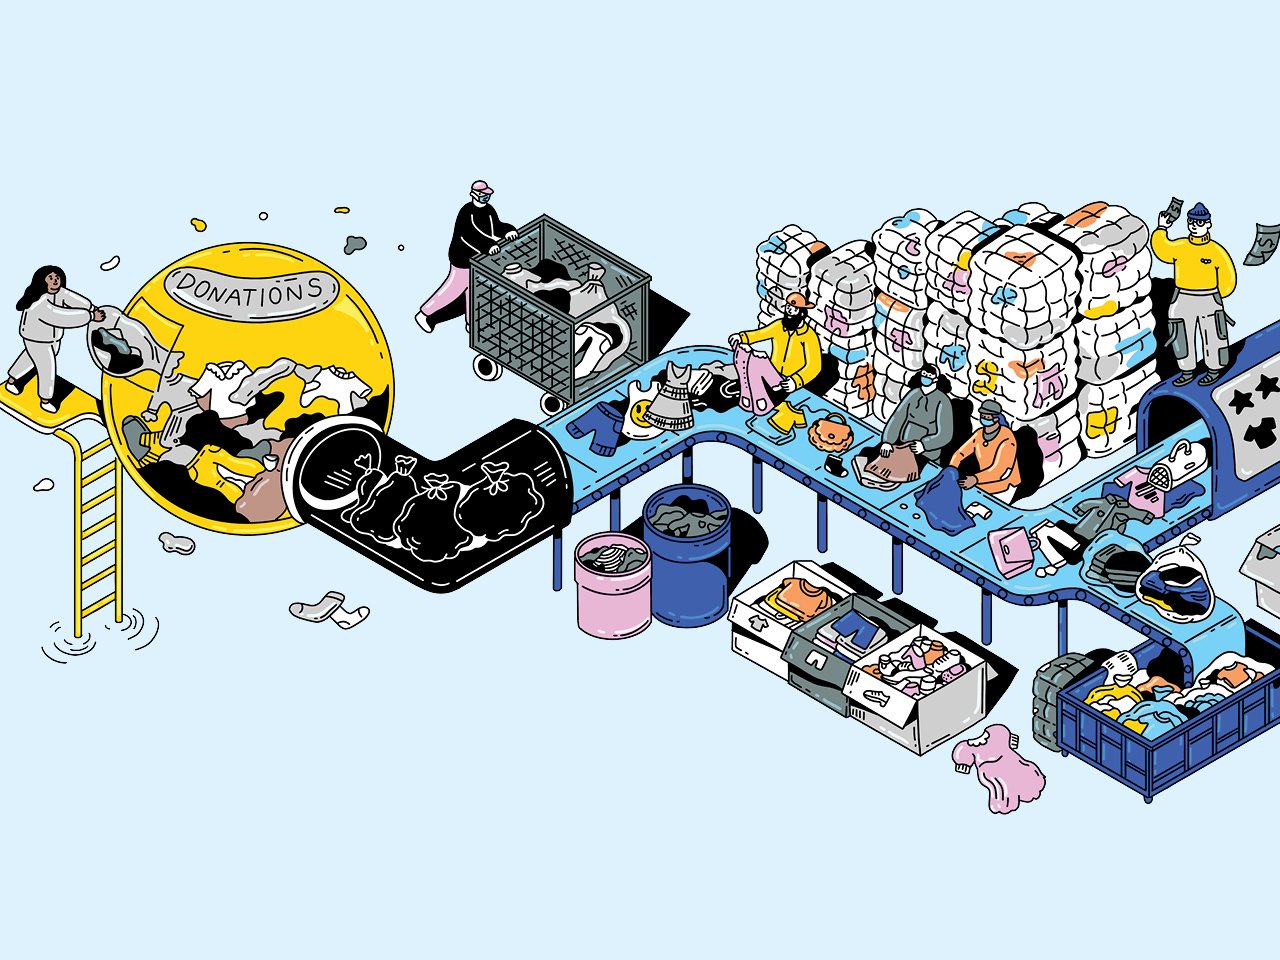 An illustration of second-hand clothing on a conveyor belt.